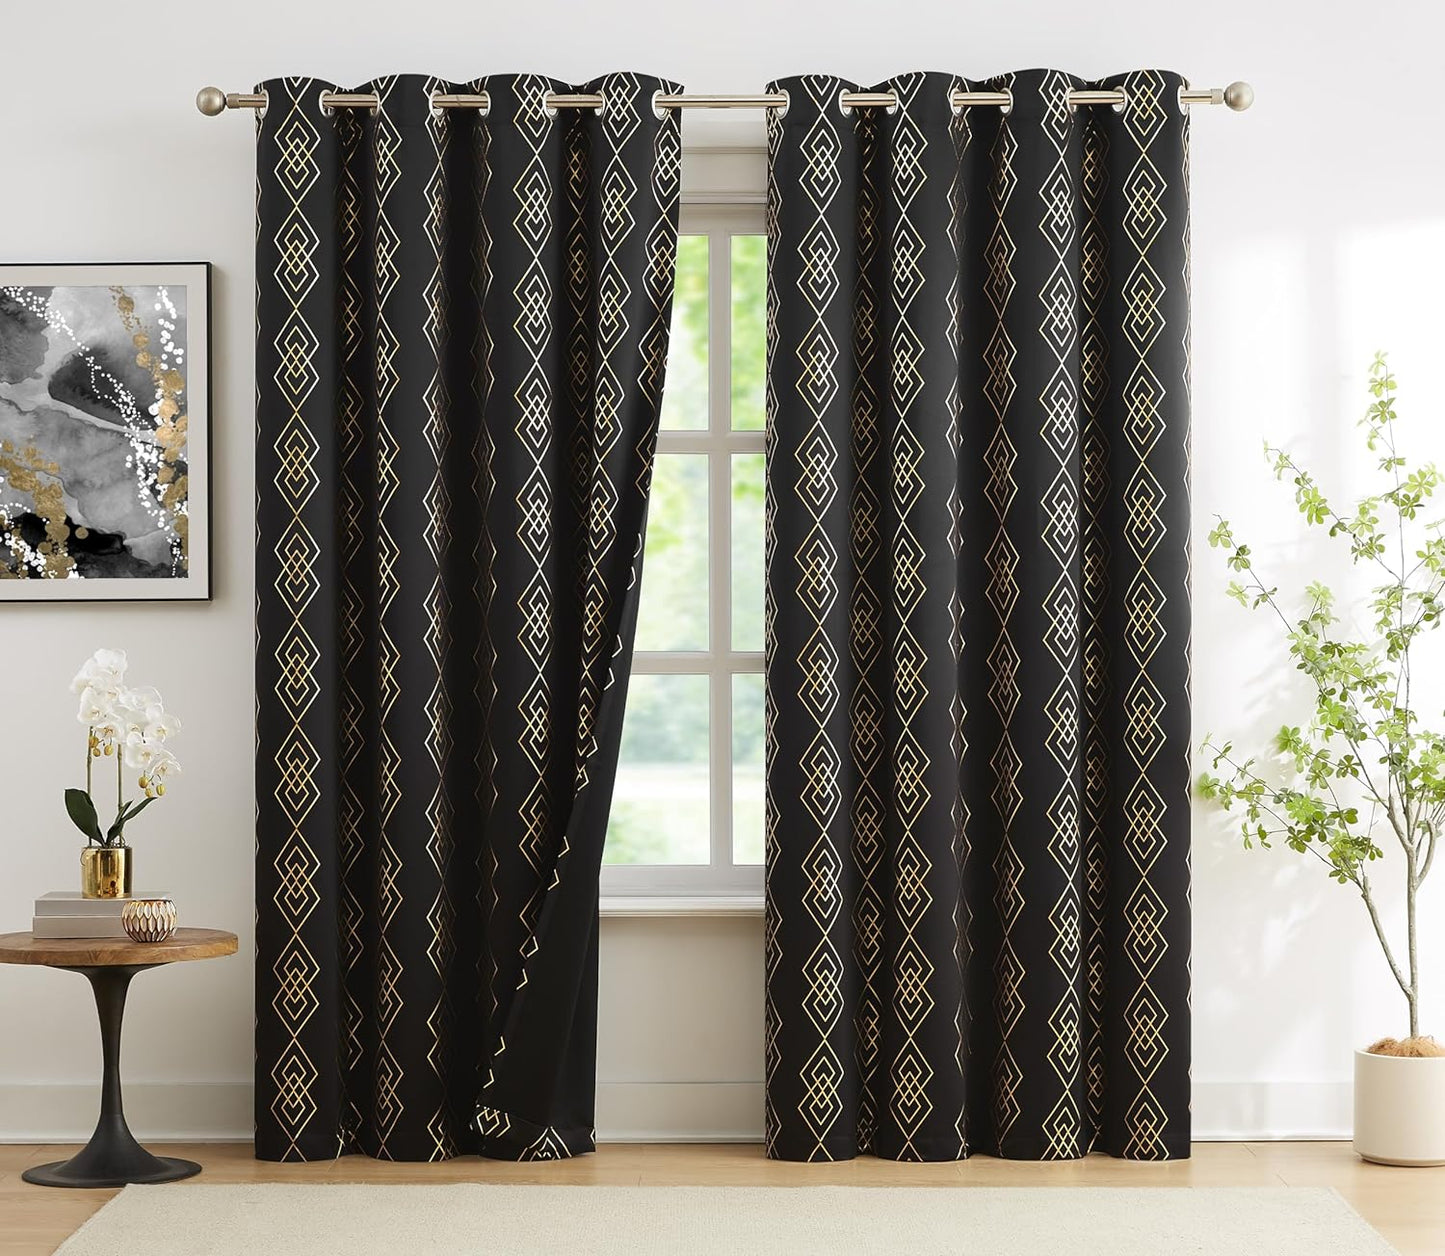 Metallic Geo Blackout Curtain Panels for Bedroom Thermal Insulated Light Blocking Foil Trellis Moroccan Window Treatments Diamond Grommet Drapes for Living-Room, Set of 2, 50" X 84", Beige/Gold  ugoutry Geometric Black 50"X84"X2 